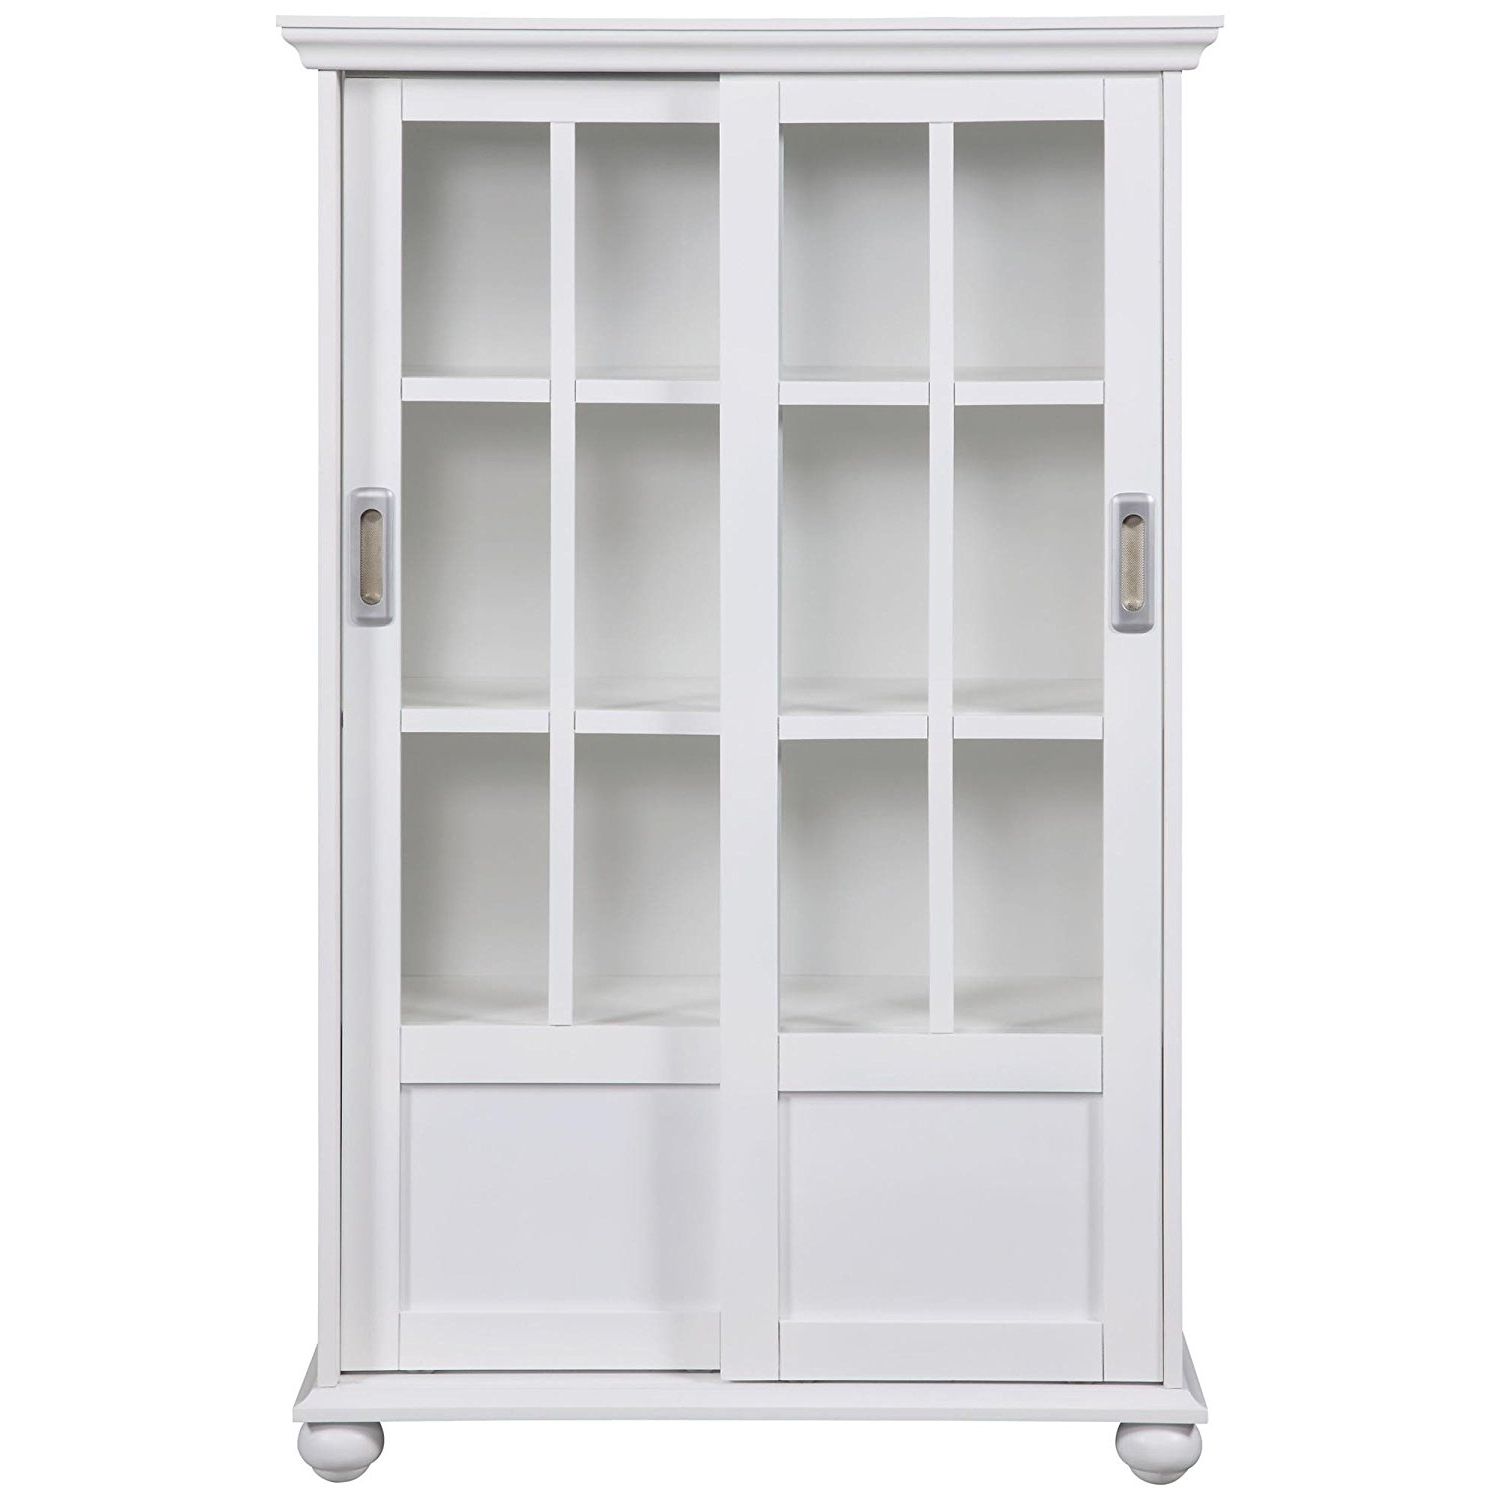 White Bookcases With Doors Intended For Most Recent Amazon: Altra 9448096 Bookcase With Sliding Glass Doors, White (View 2 of 15)